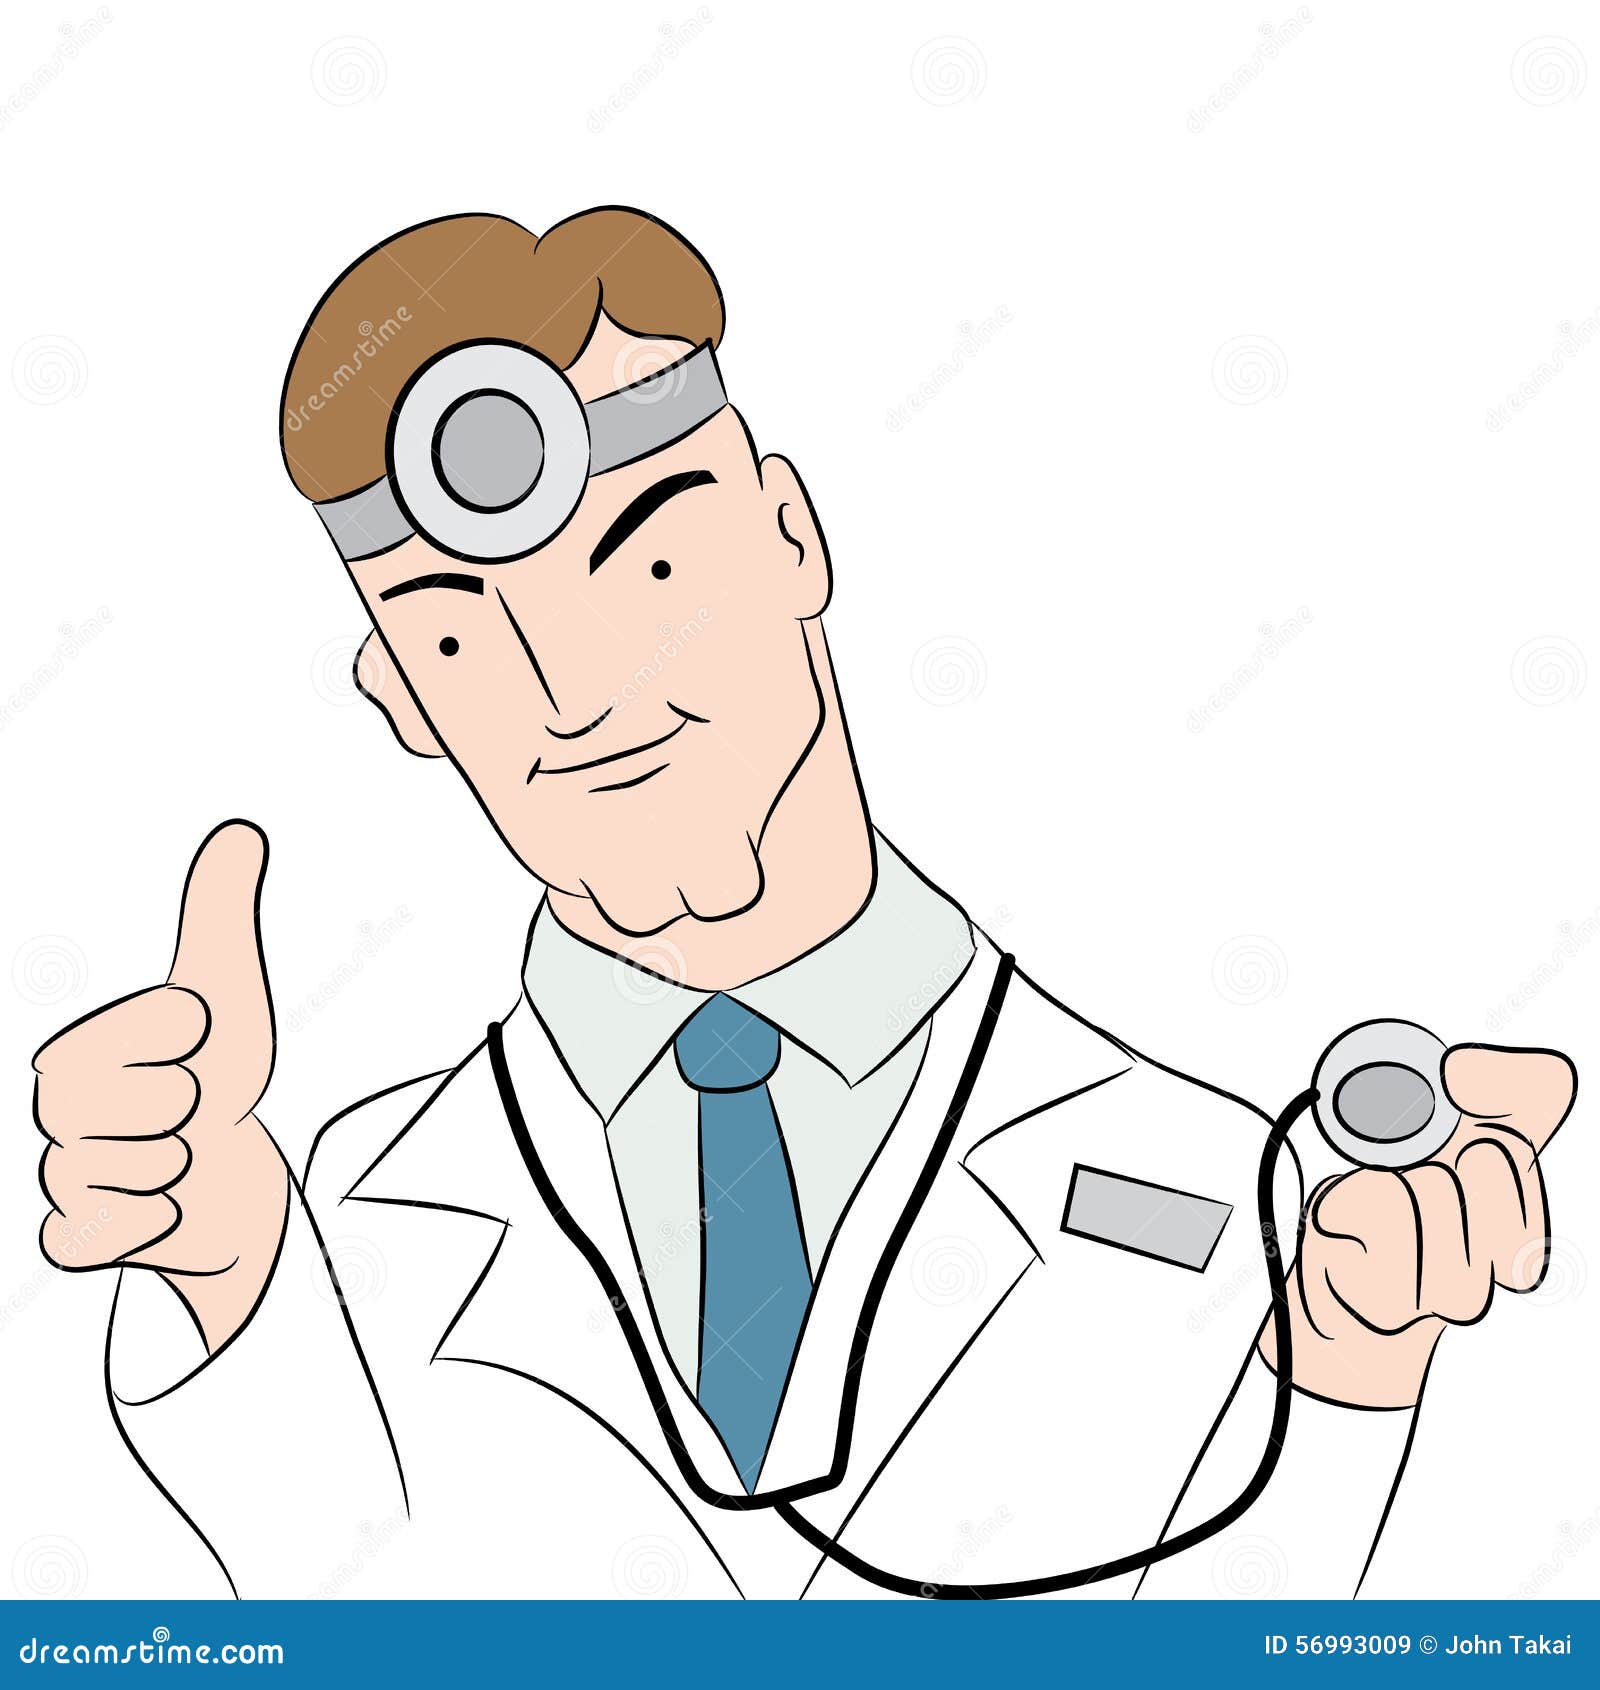 cartoon physician test results